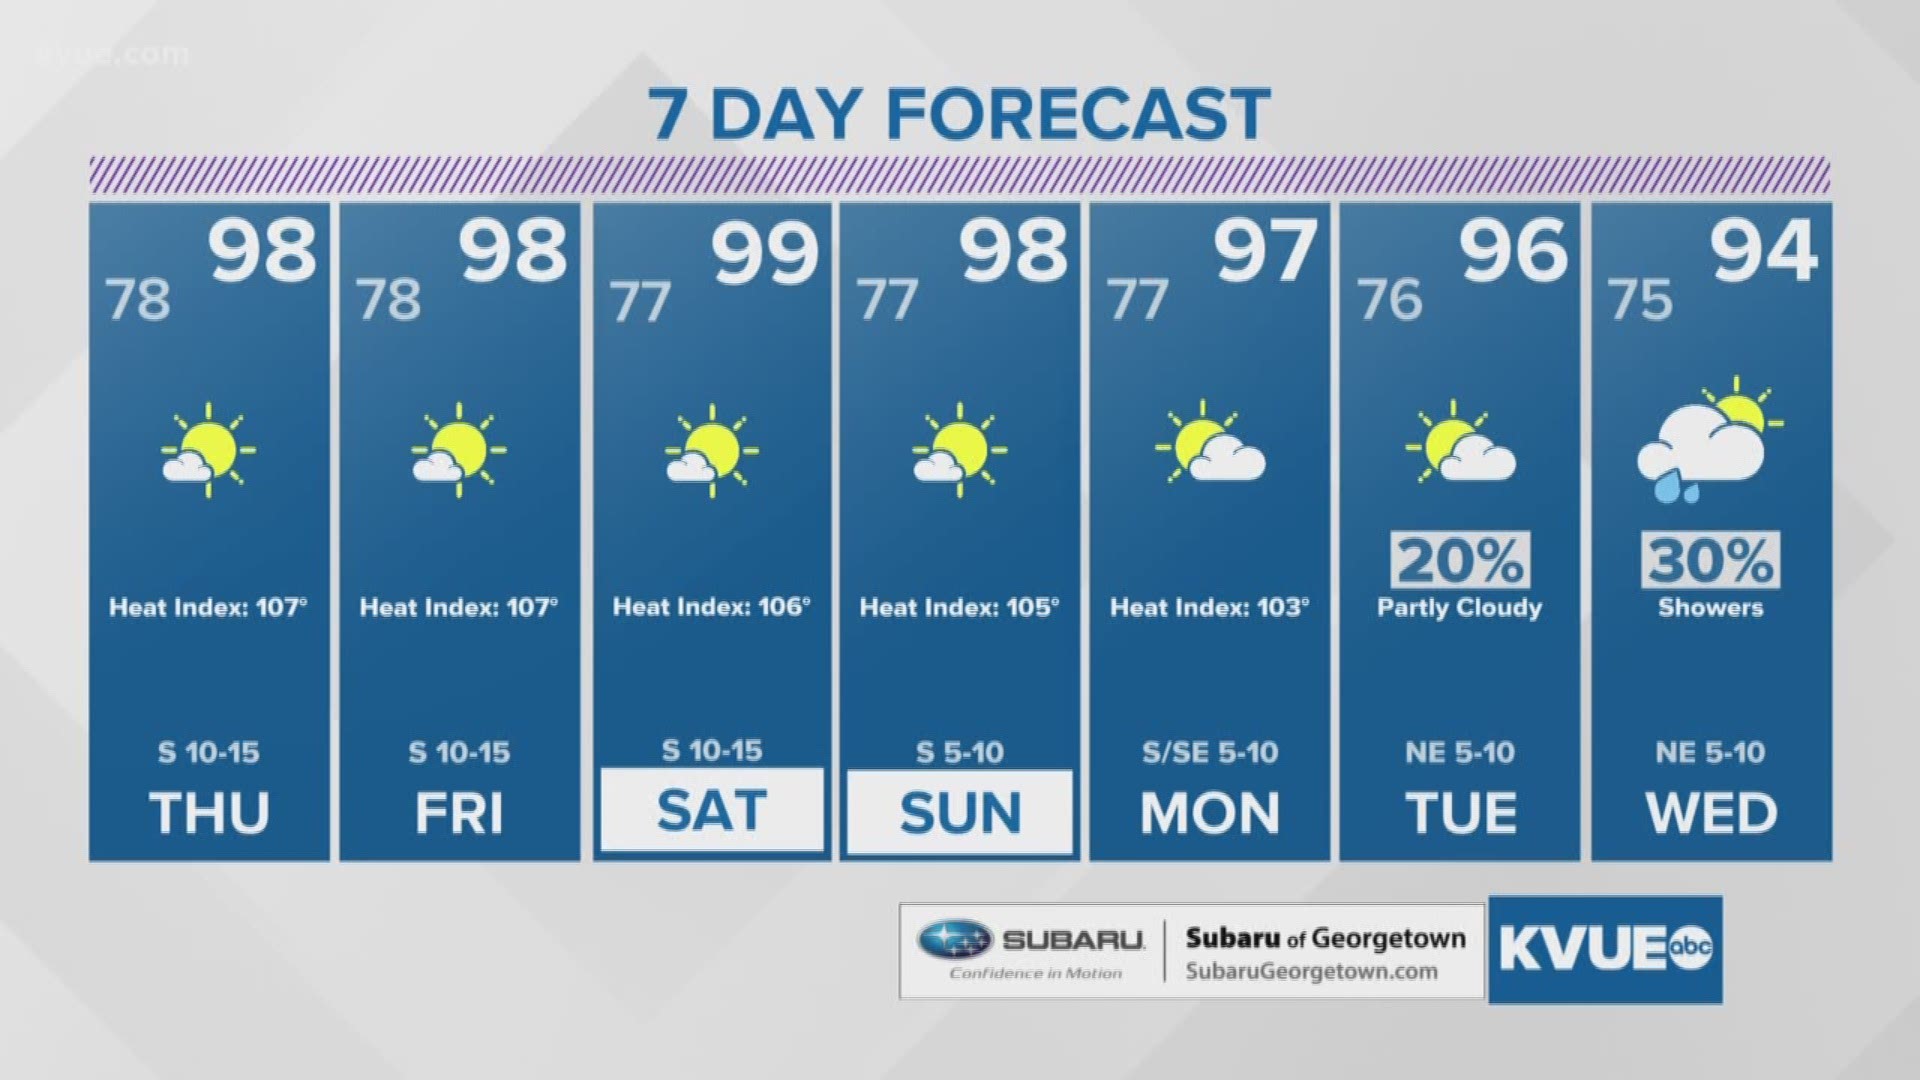 Hot conditions through the weekend.